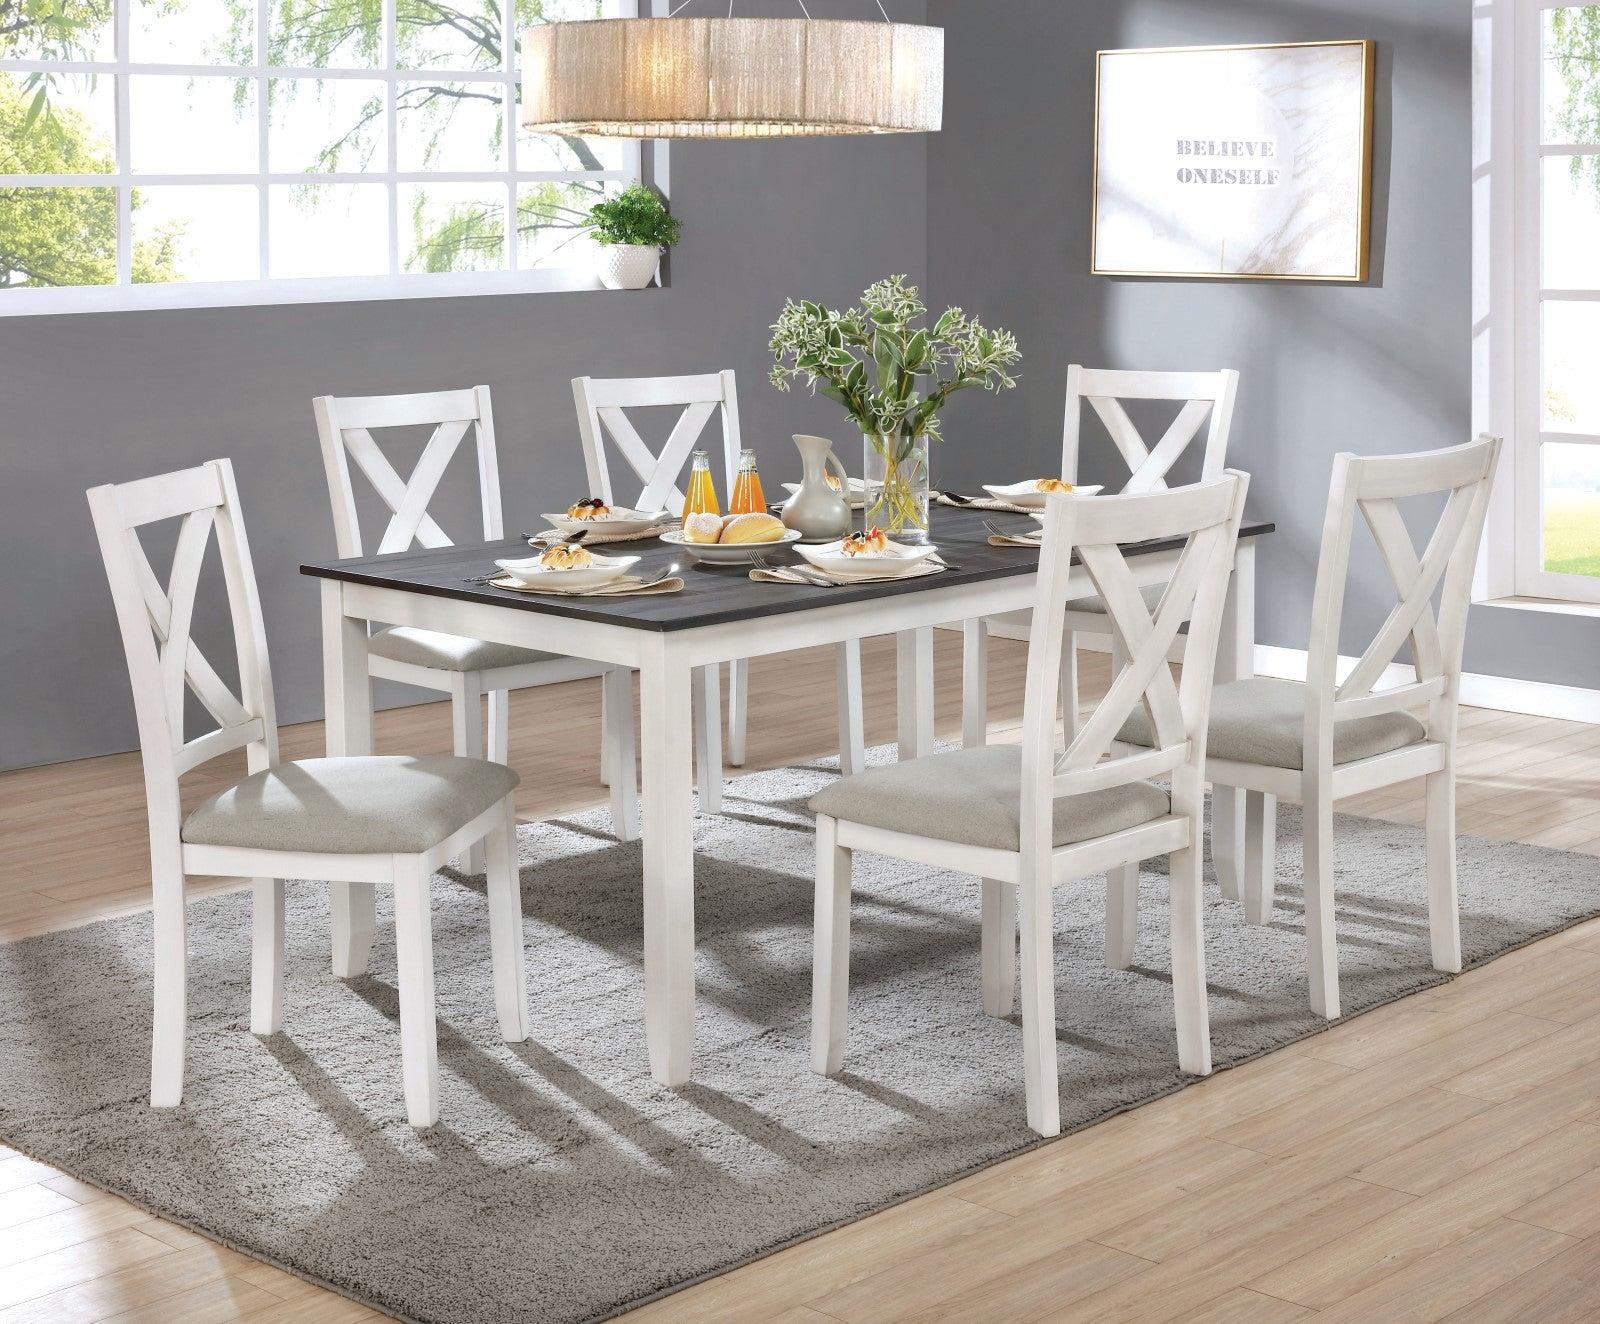 Rustic Dining Table Set CM3476WH-T-7PK Anya CM3476WH-T-7PK in White, Gray Fabric